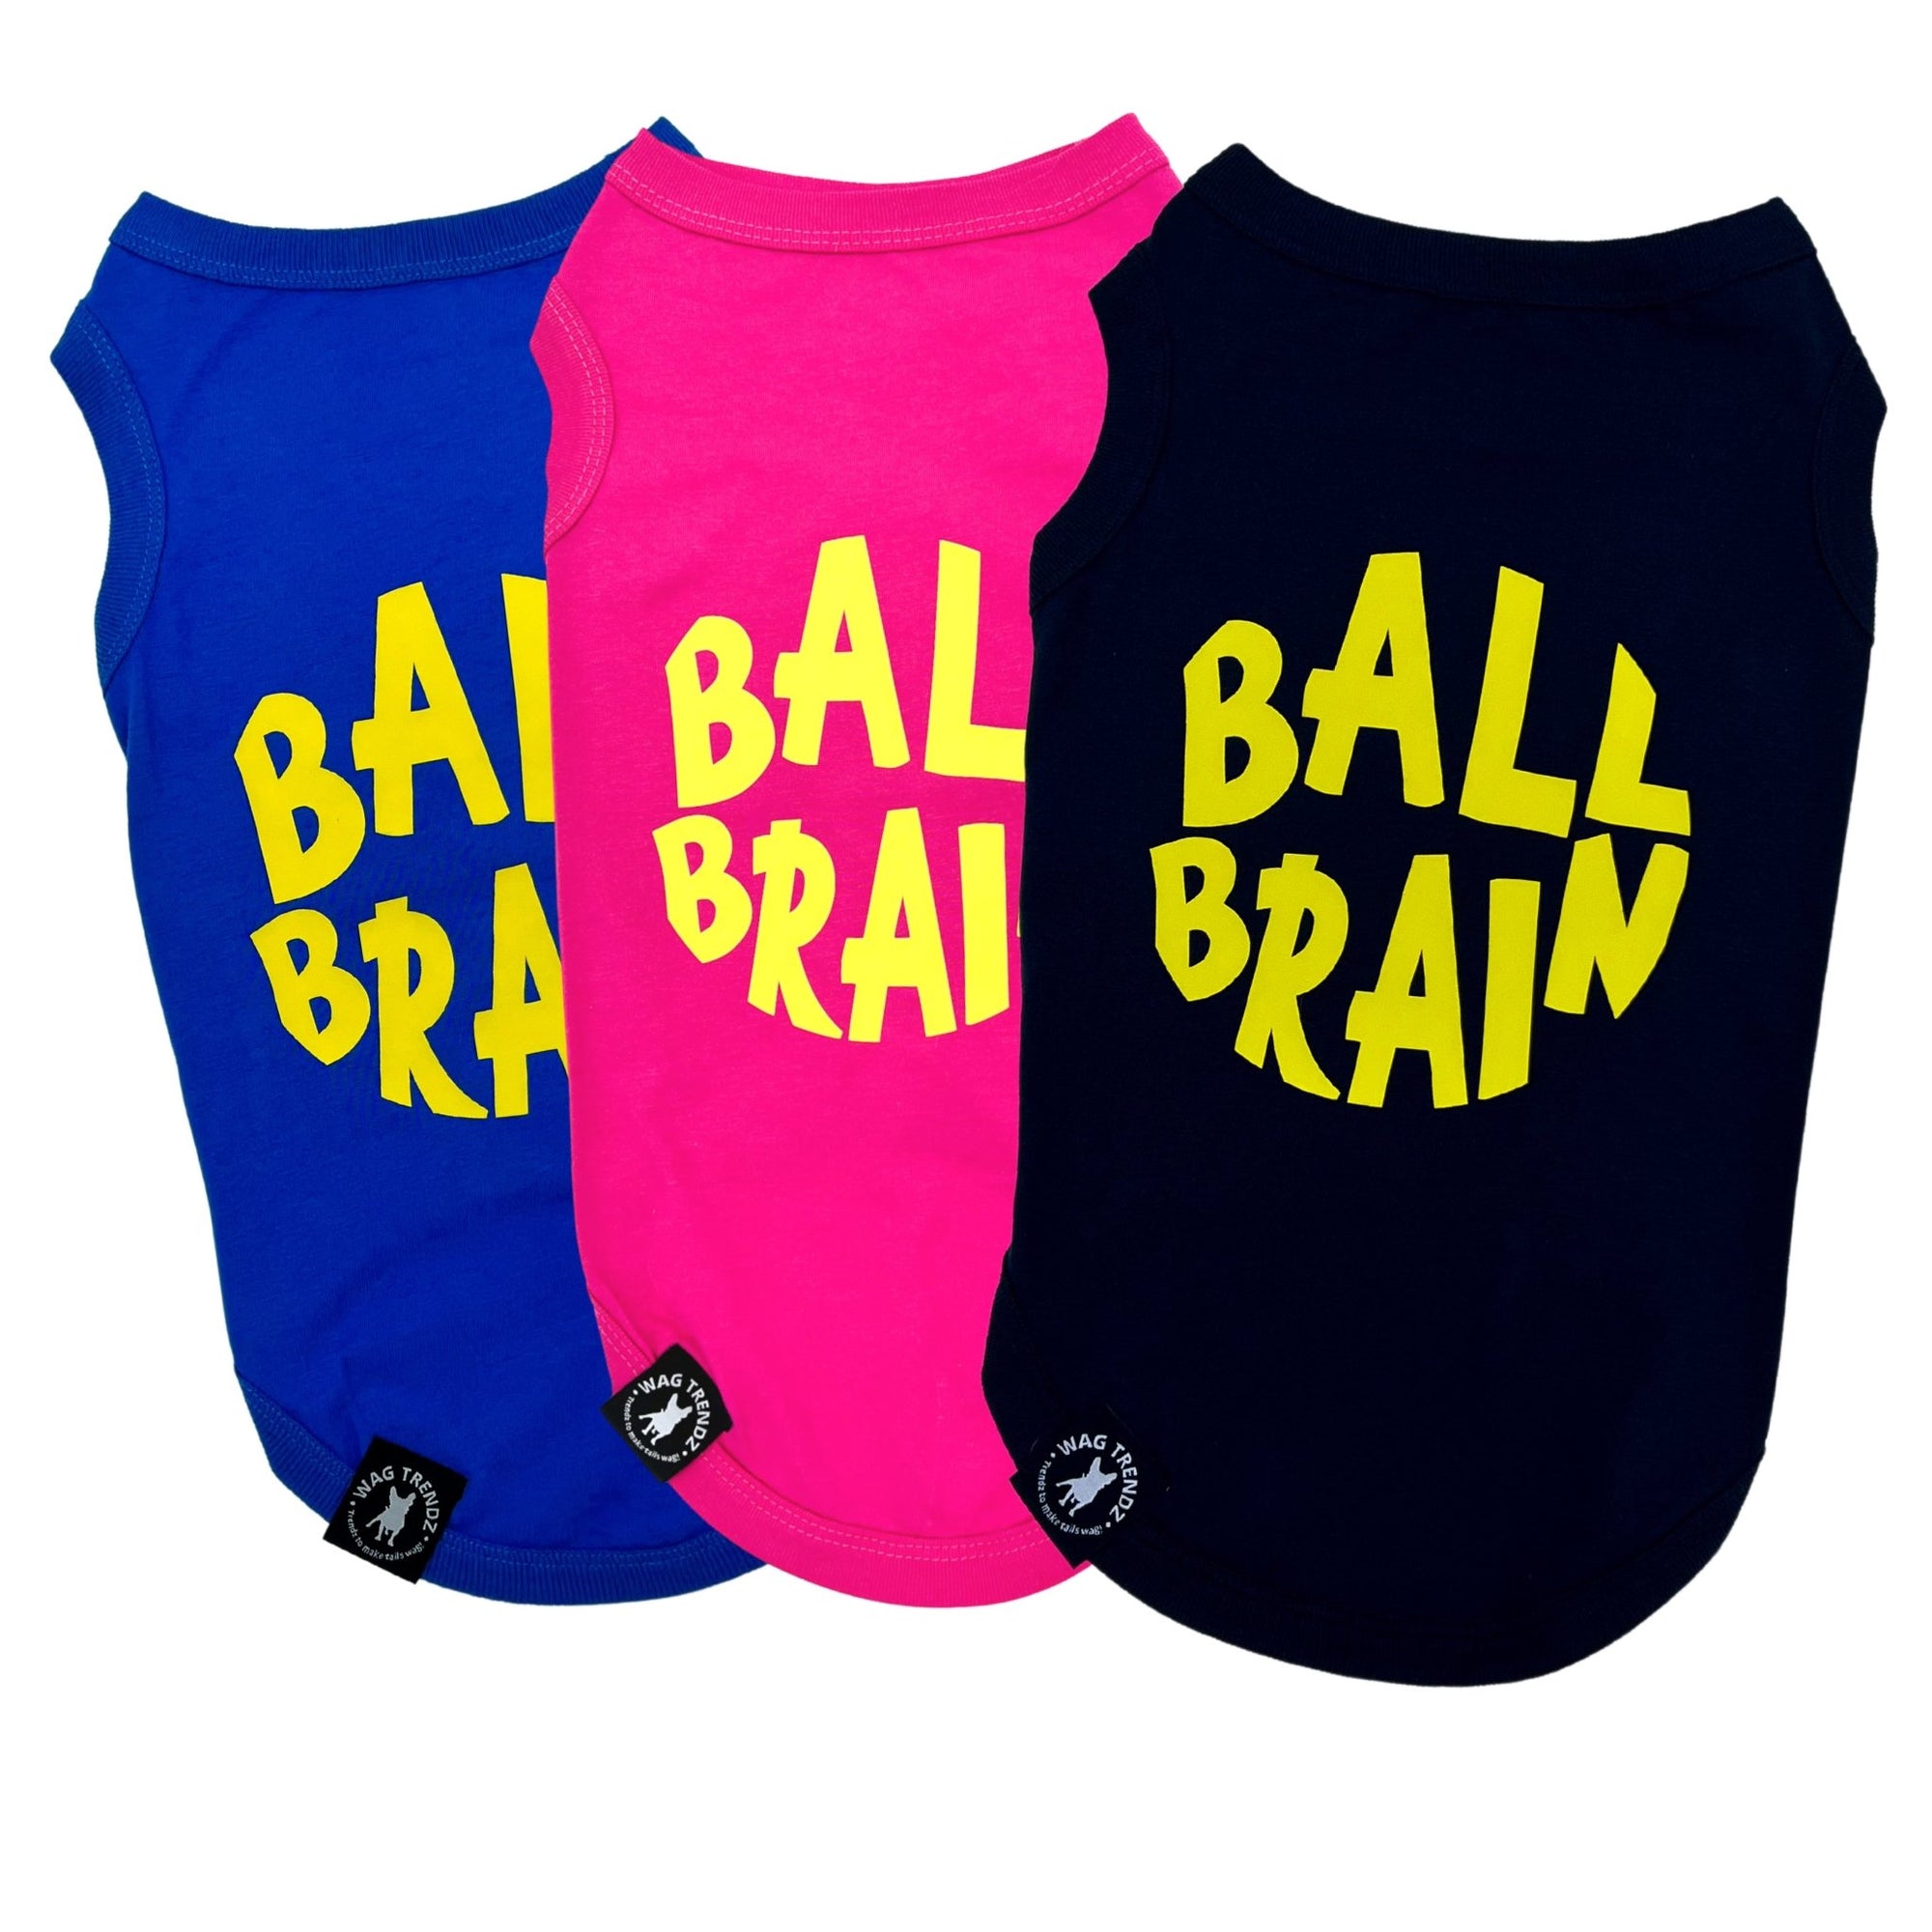 Dog T-Shirt - Ball Brain - Blue, Black &amp; Pink (backside) with bright yellow Ball Brain - against solid white background  - Wag Trendz